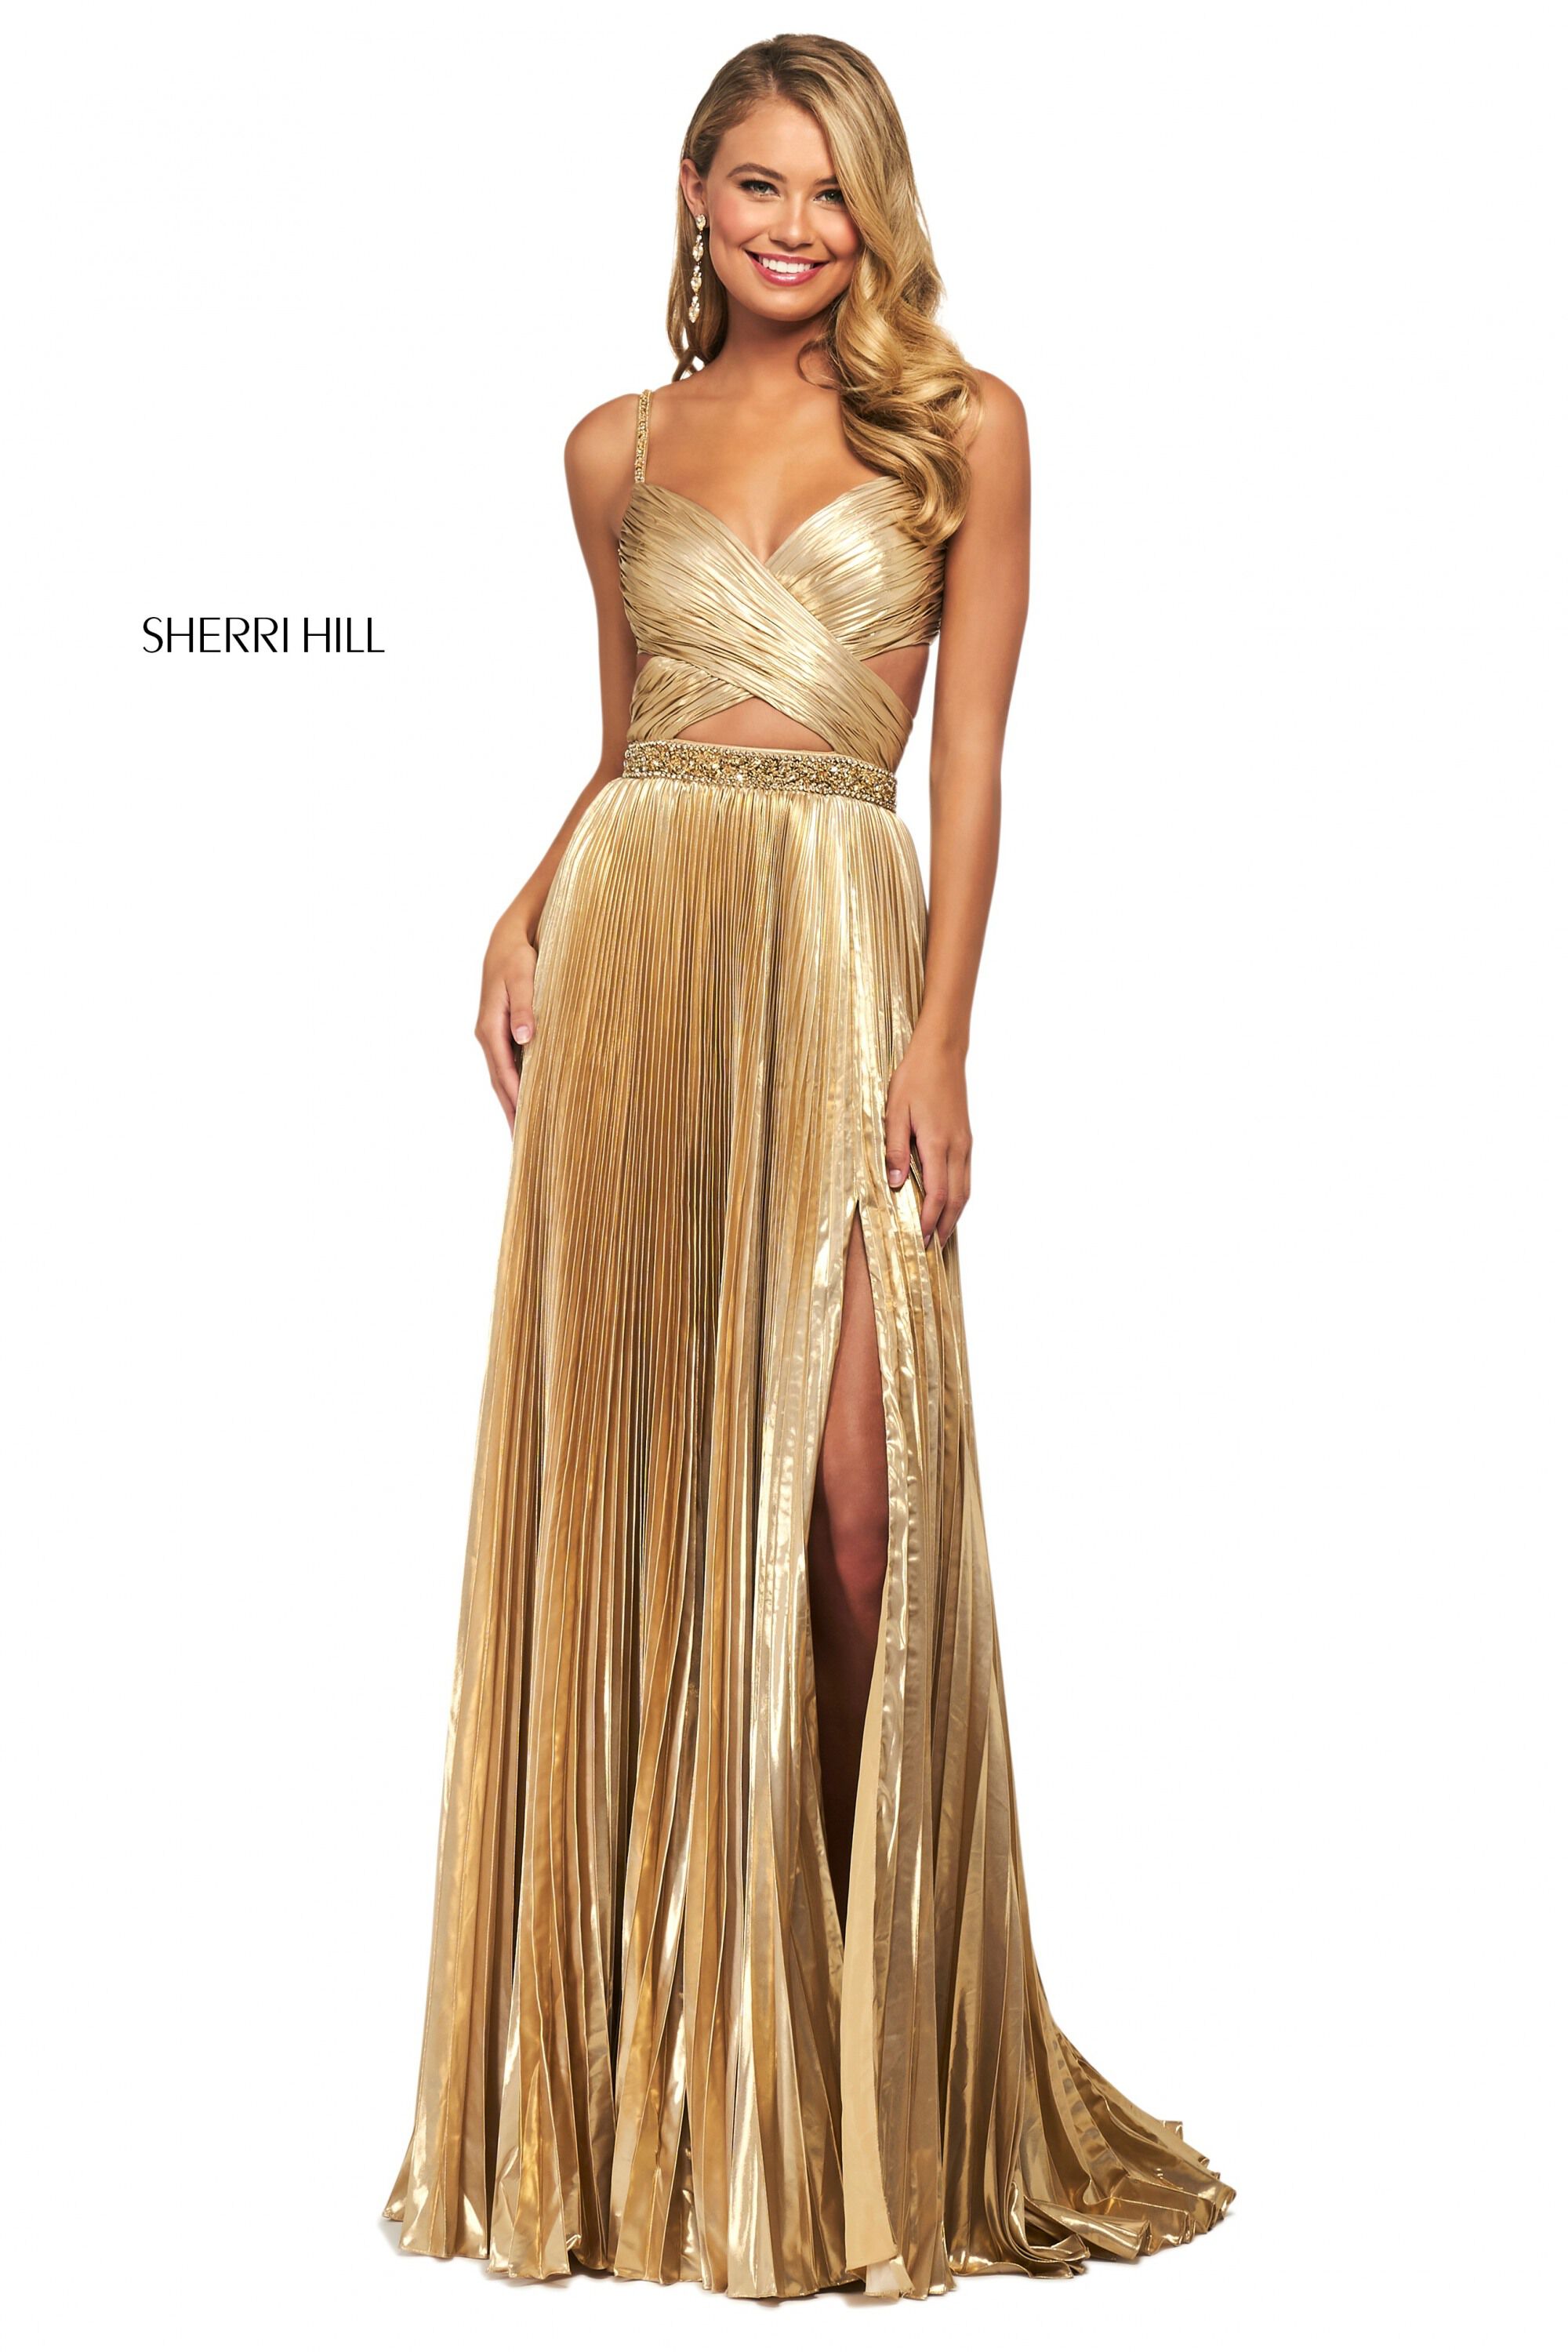 style № 53738 designed by SherriHill